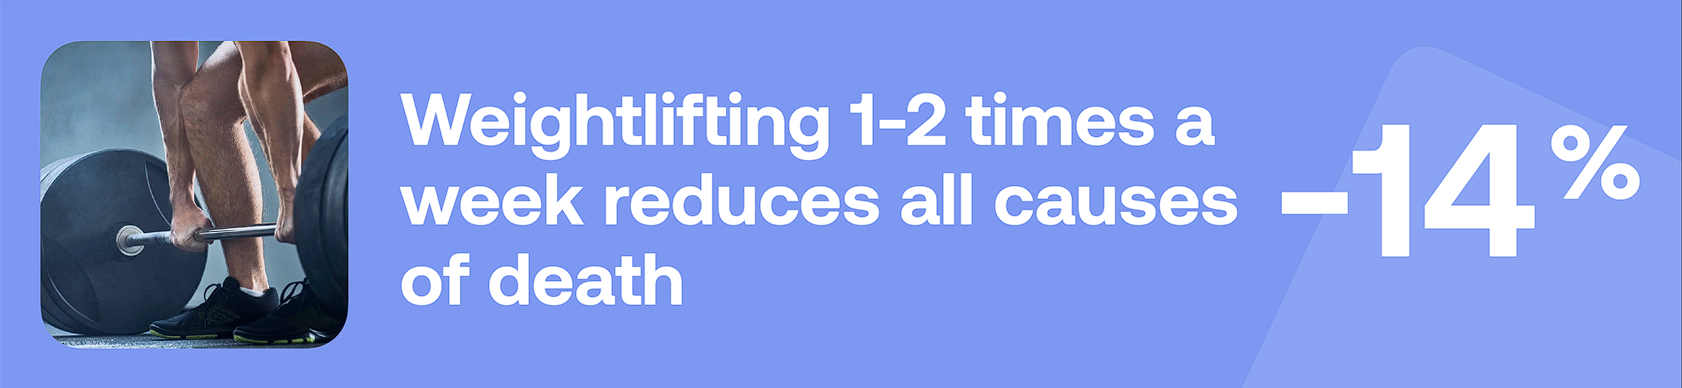 Weightlifting 1-2 times a week reduces all causes of death -14%